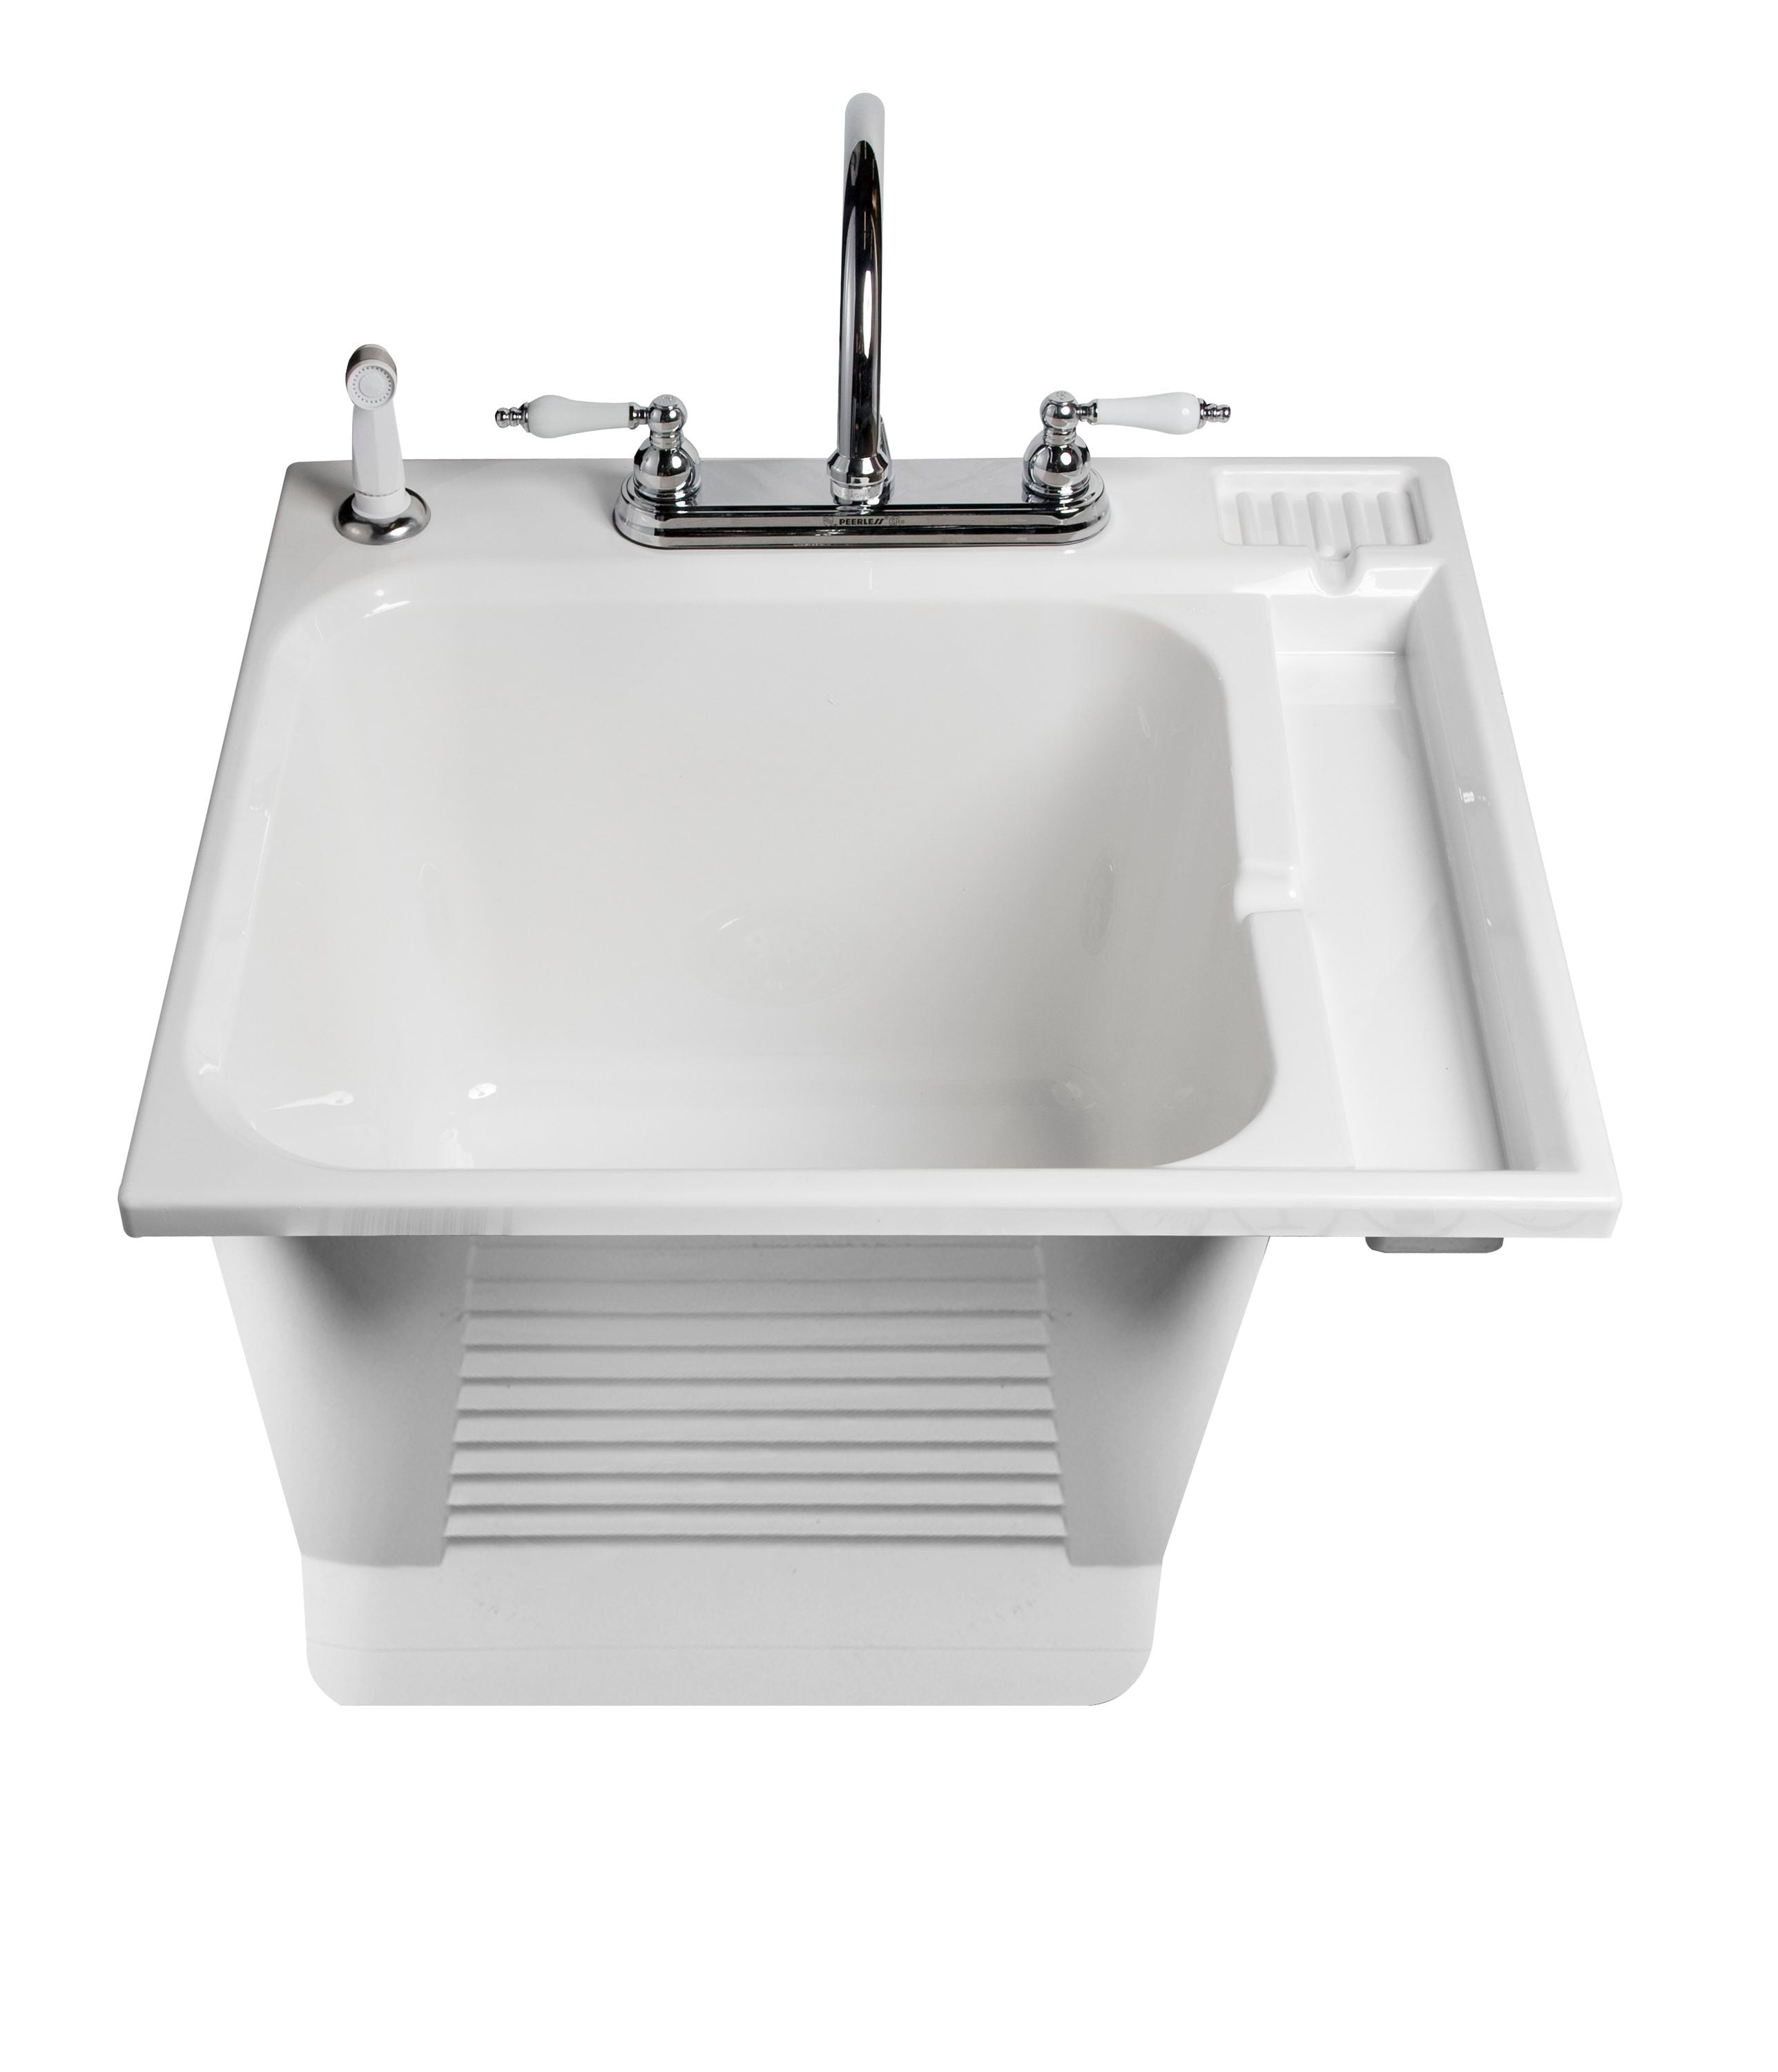 ASB 25-in x 25-in White Drop-In Laundry Sink with Faucet at